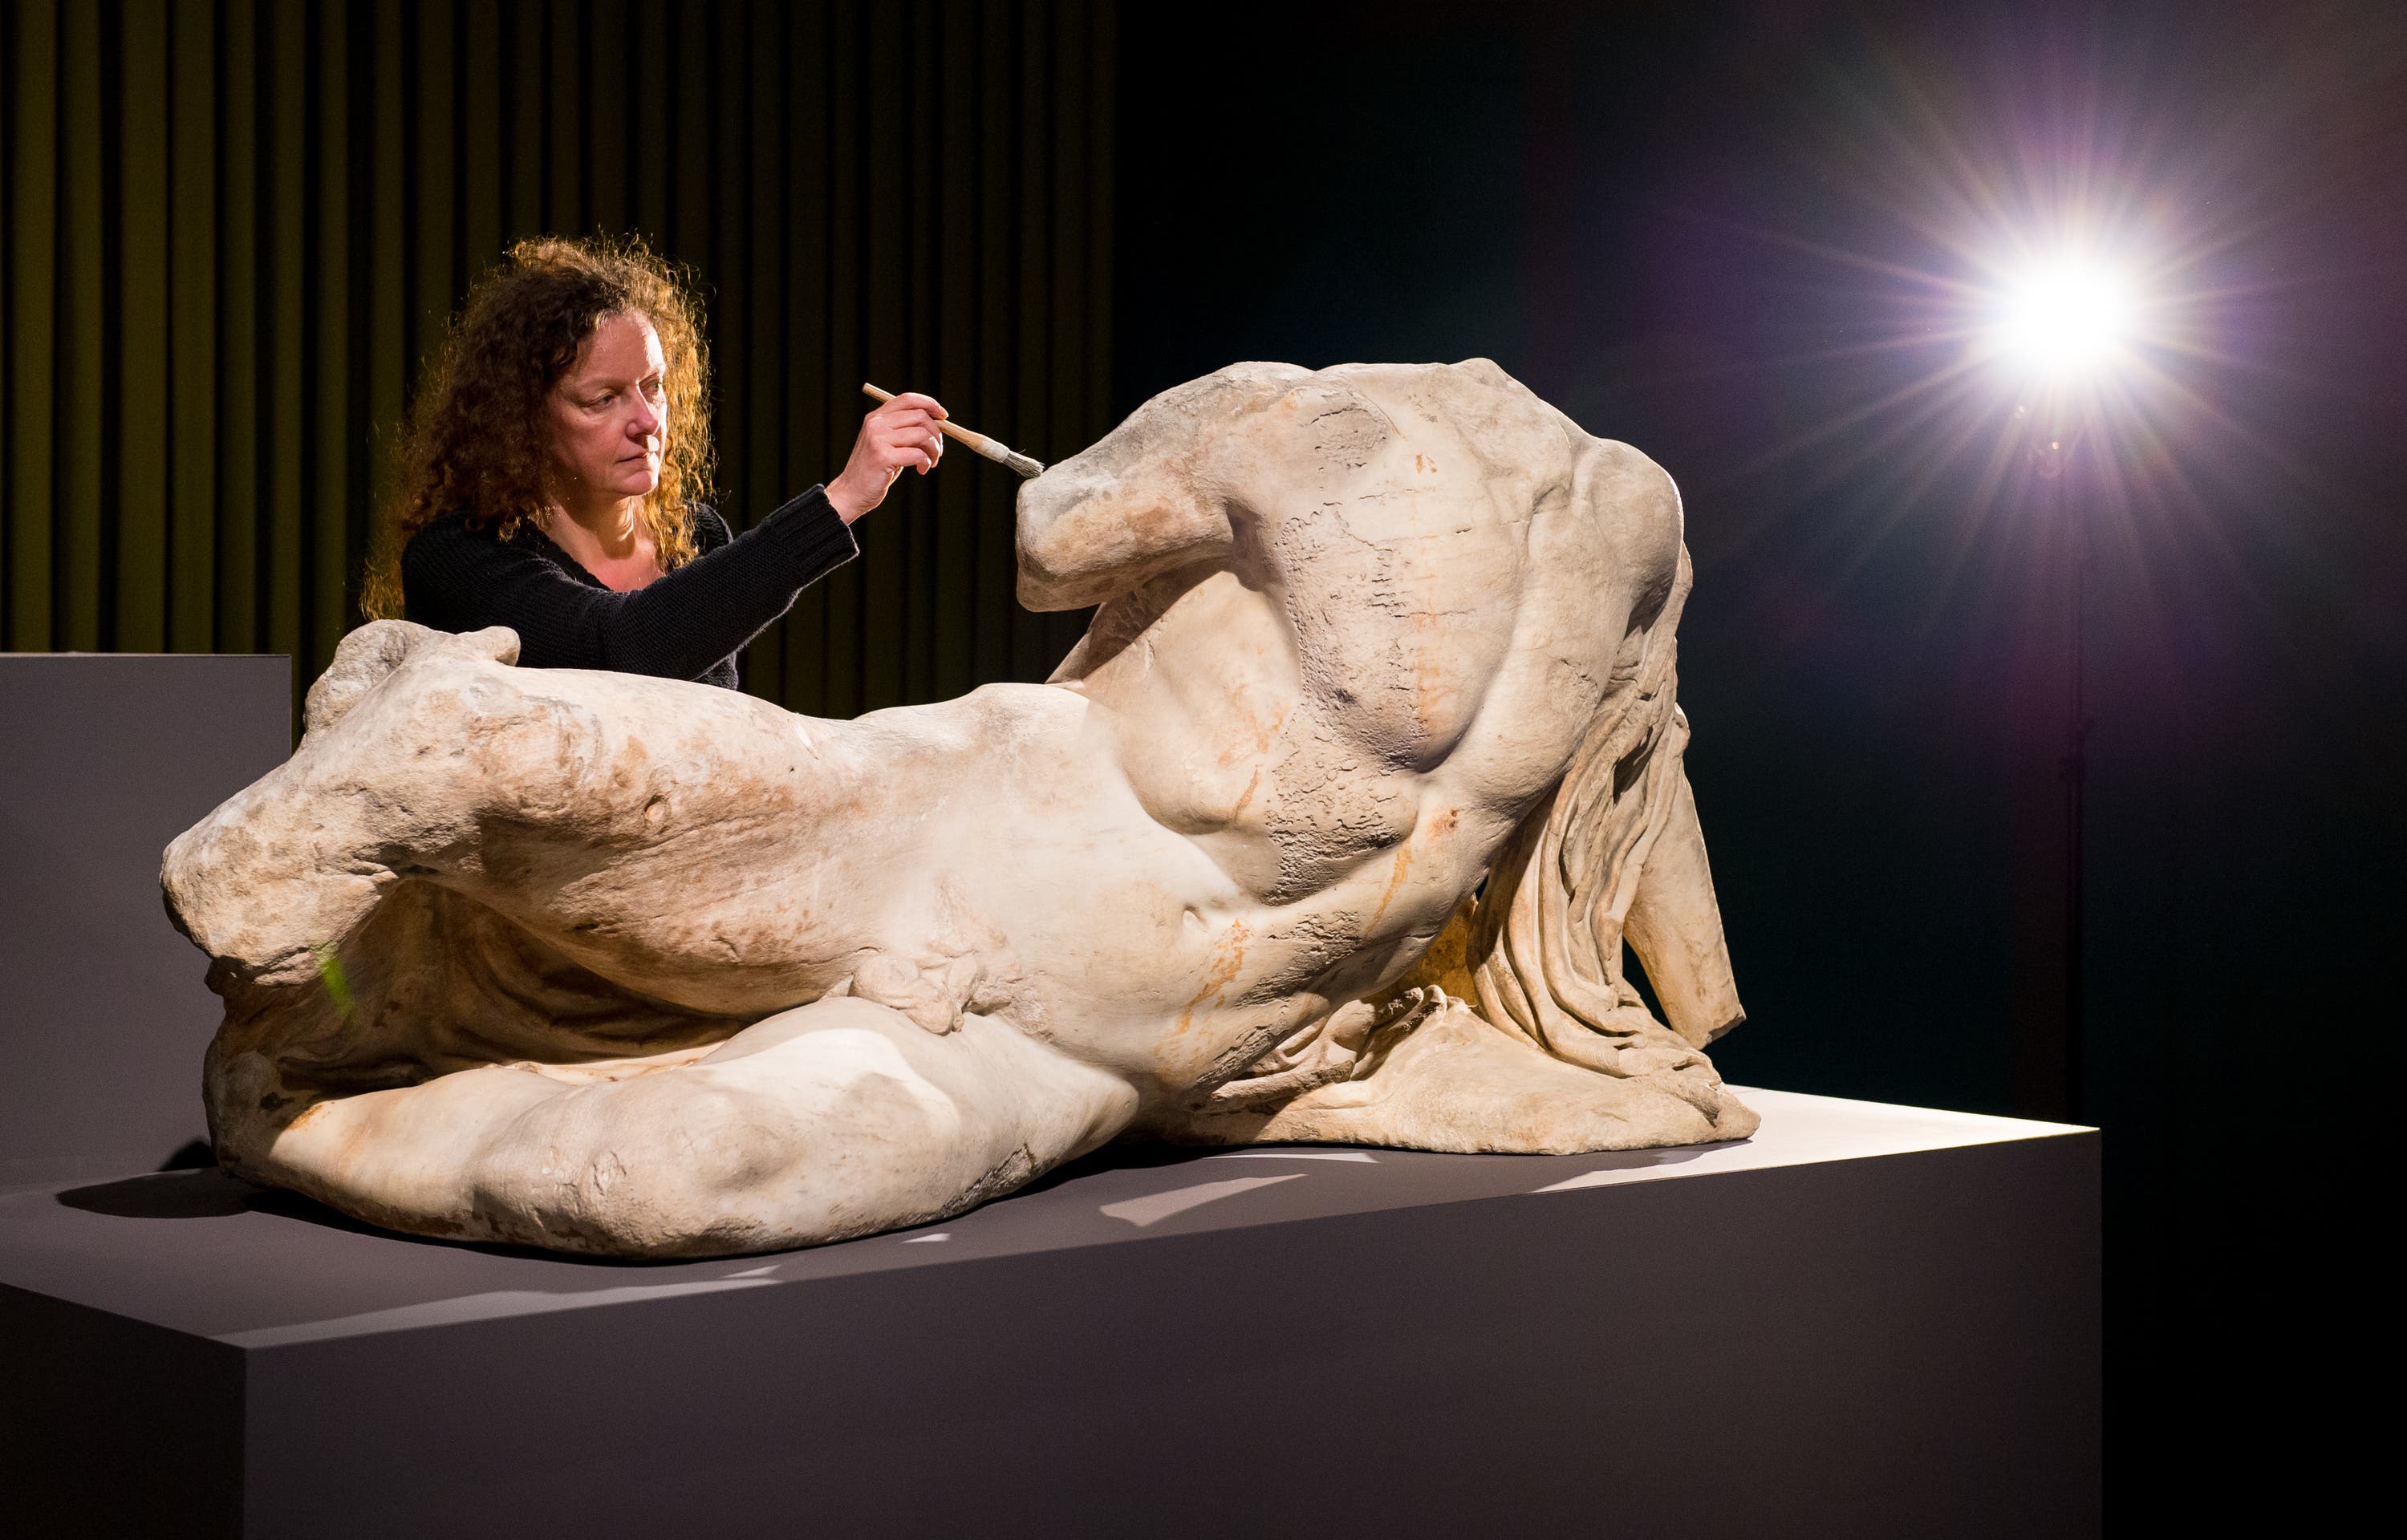 Senior conservator Karen Birkhoelzer with the sculpture The River God Ilissos by Phidias, part of the so-called Elgin Marbles.